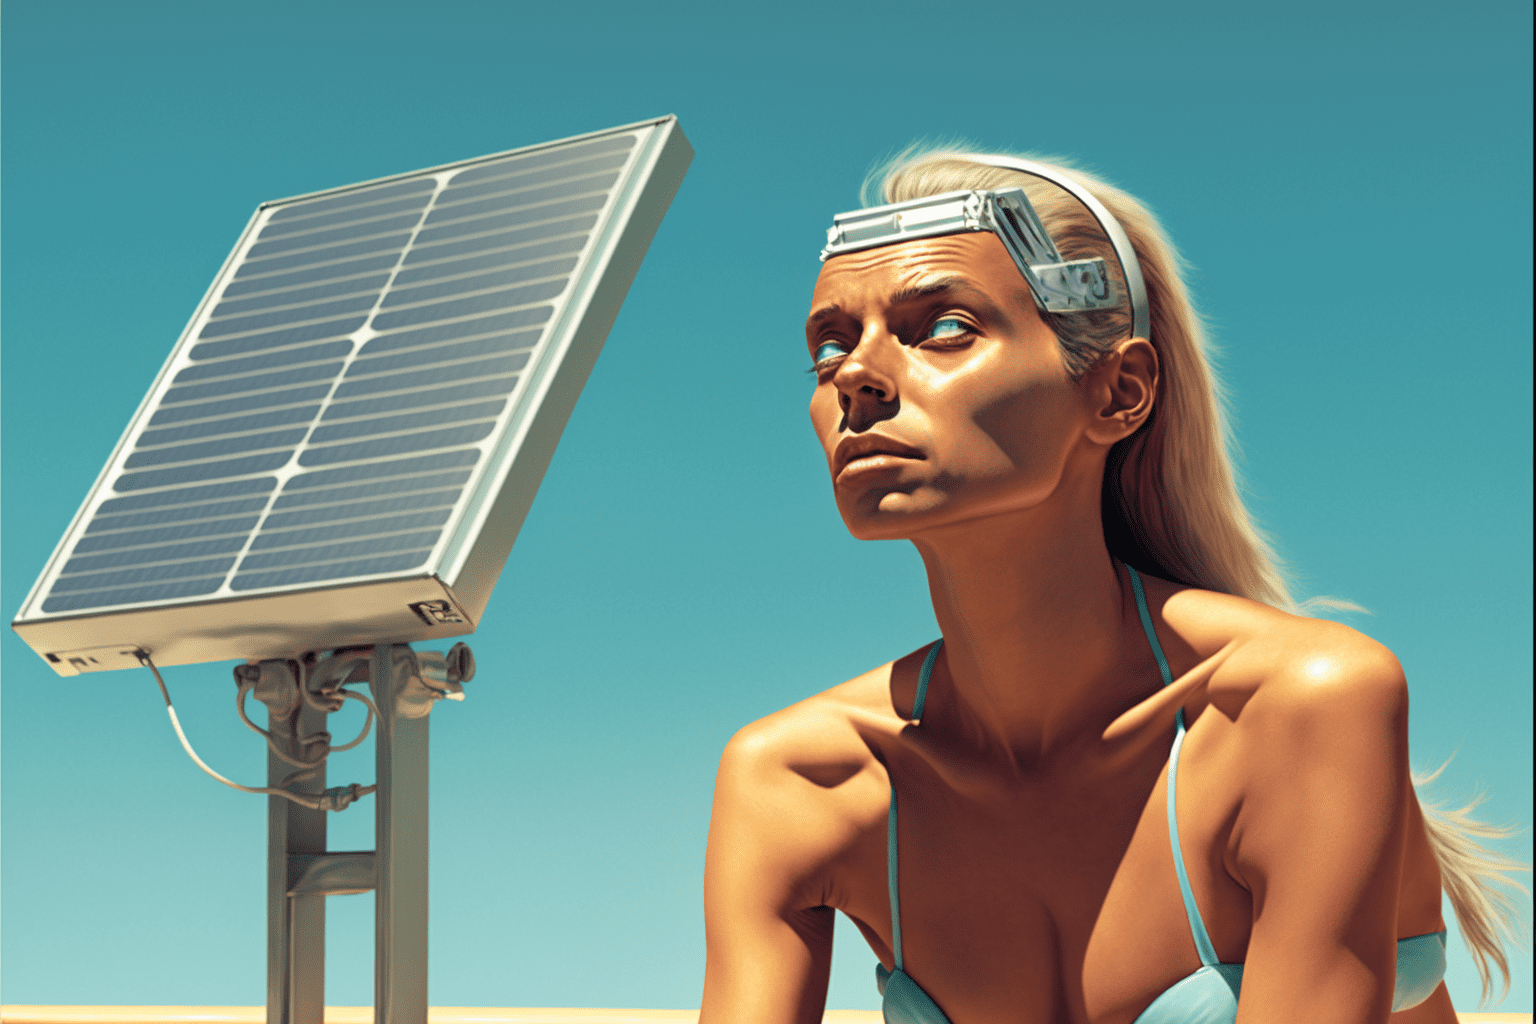 Can You Get a Tan Staring at a Solar Panel?